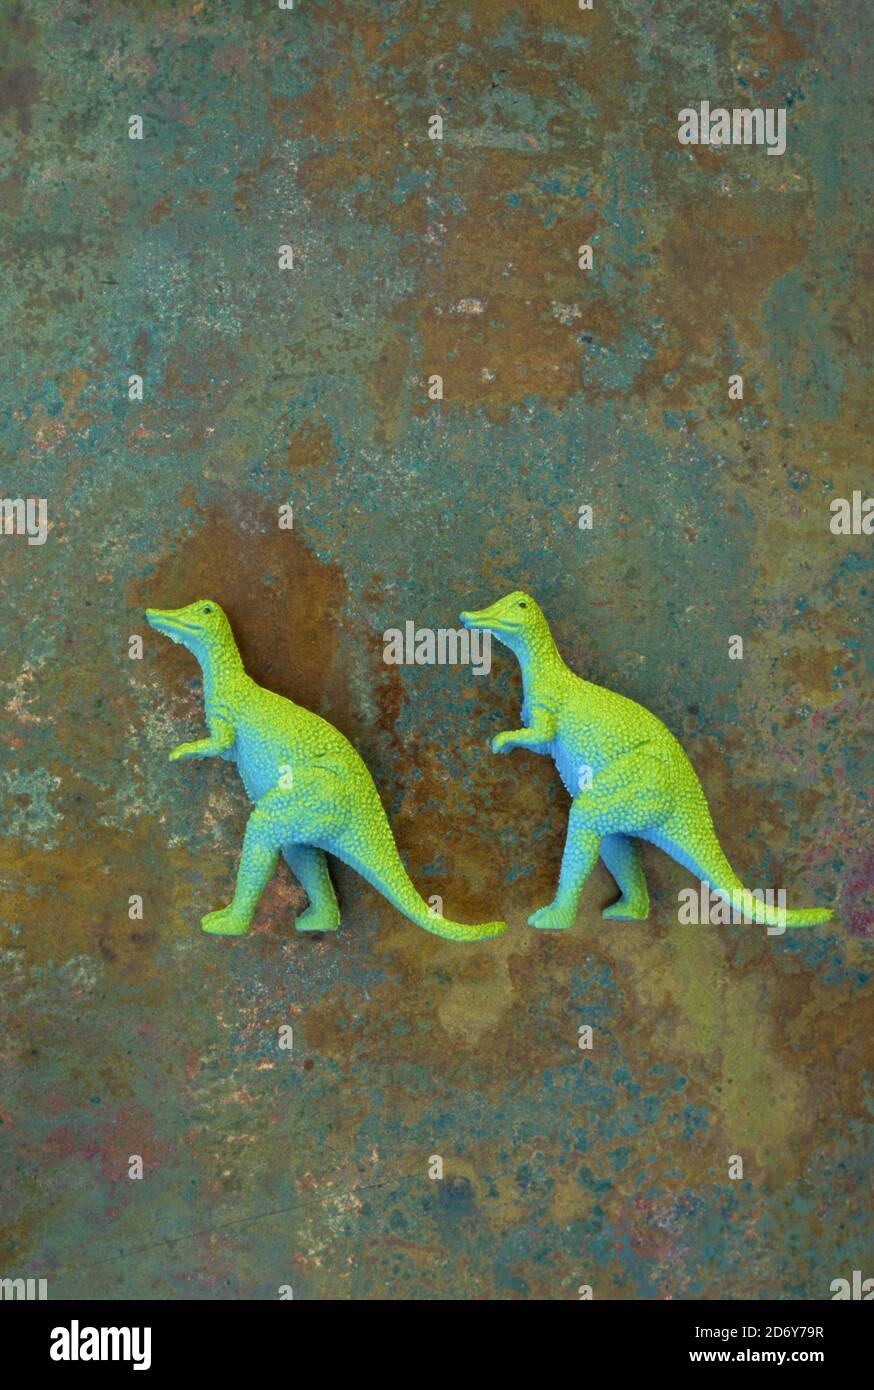 Two models of dinosaurs Tyrannosaurus with blue bodies and lime green backs walking in line Stock Photo